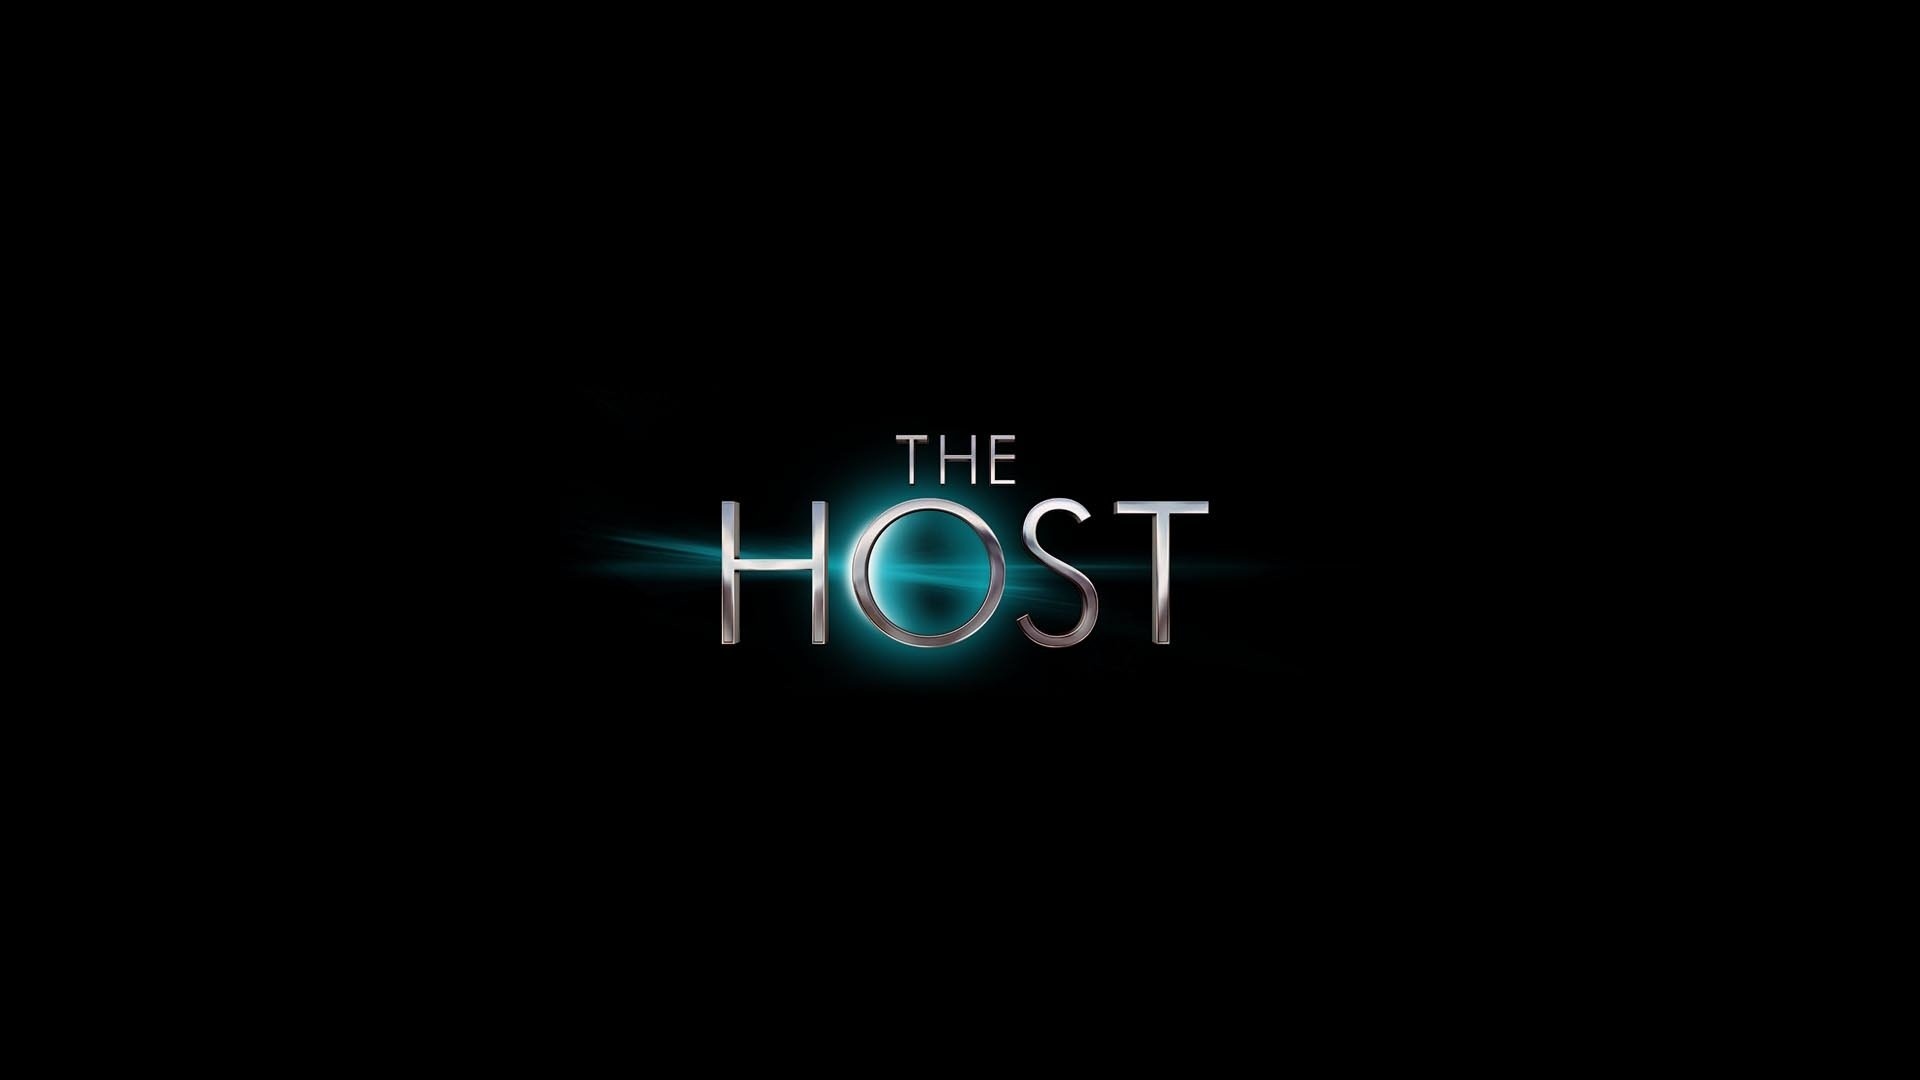 The Host (Movie), Thought-provoking plot, Cinematic masterpiece, Riveting, 1920x1080 Full HD Desktop